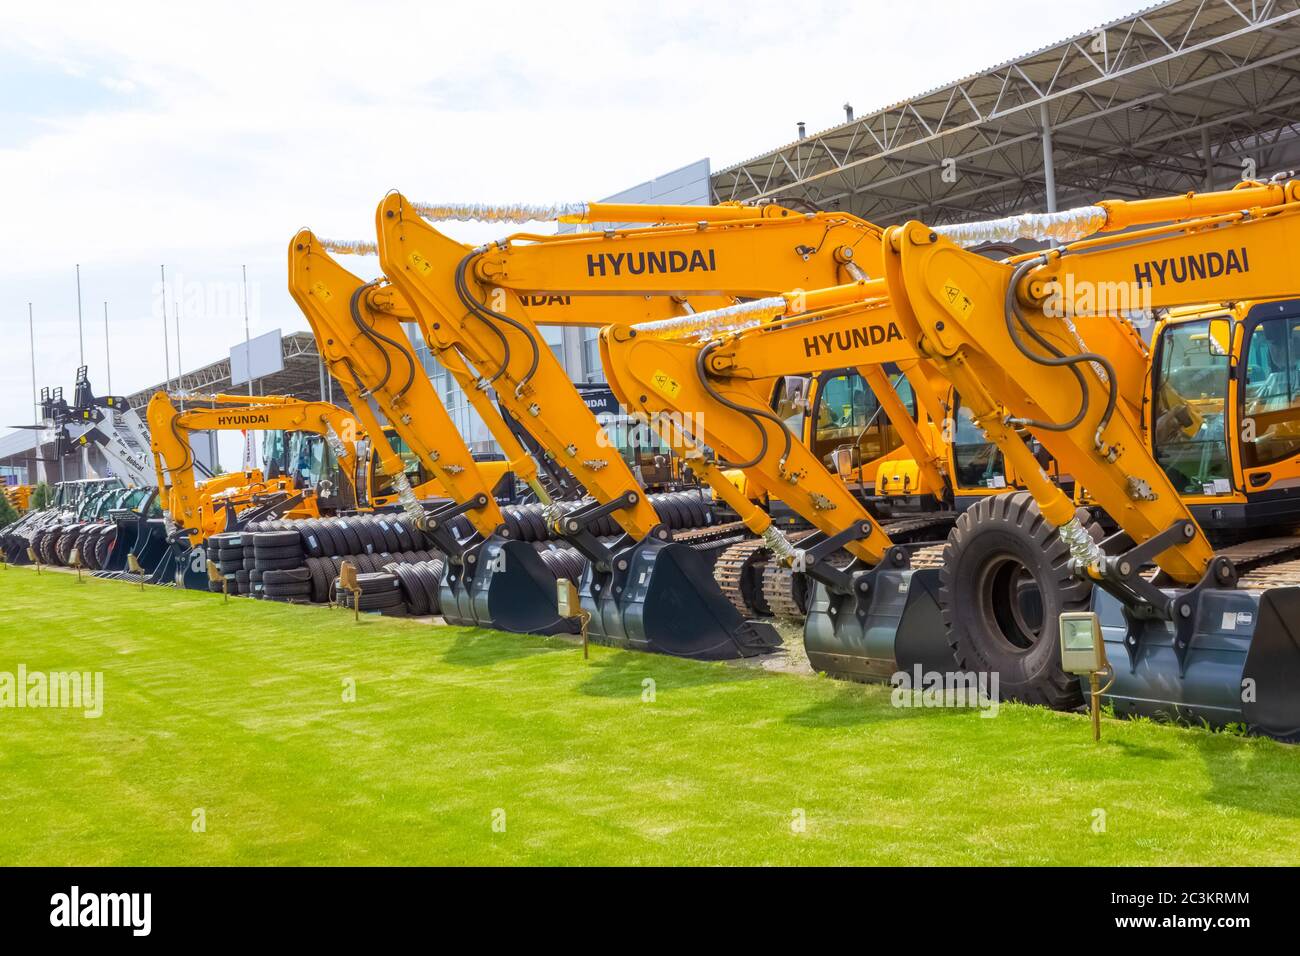 Hyundai Excavator High Resolution Stock Photography And Images Alamy